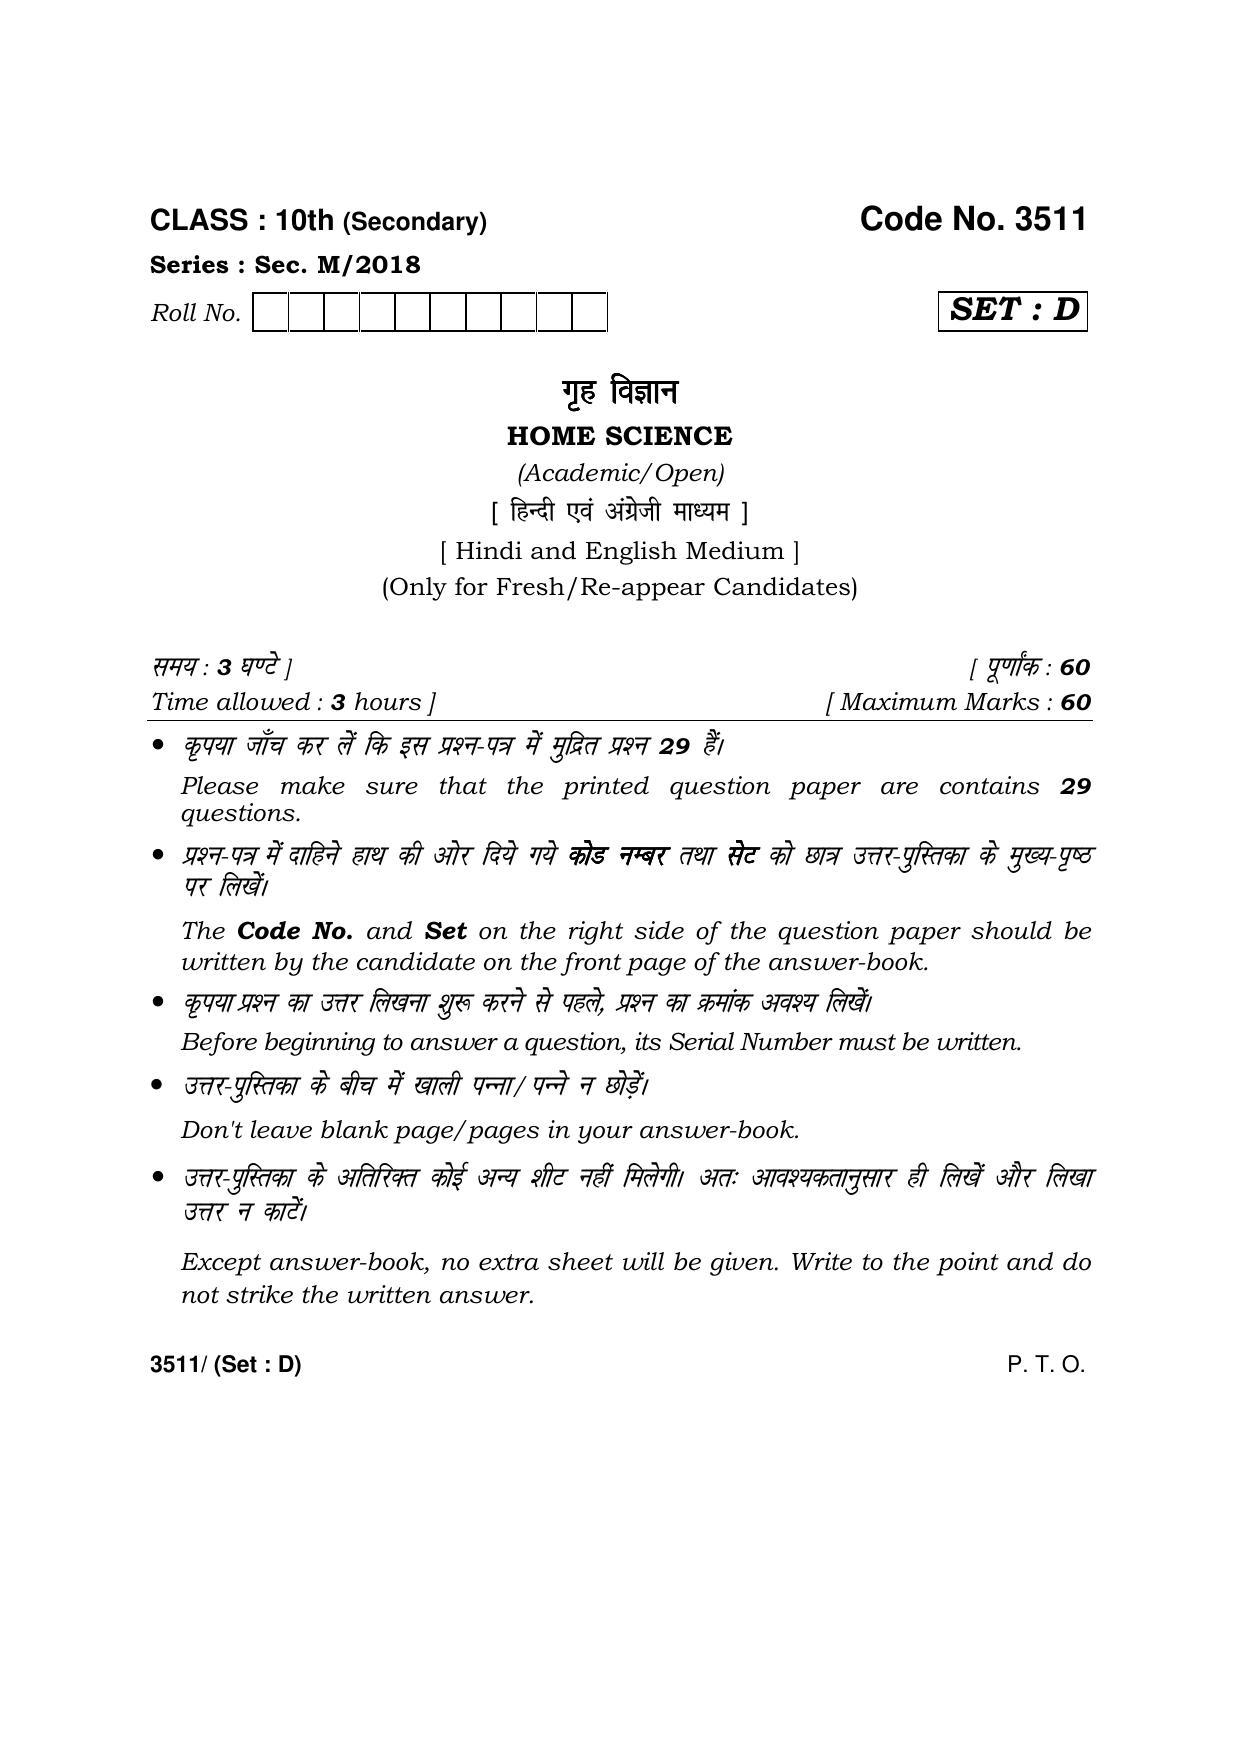 Haryana Board HBSE Class 10 Home Science -D 2018 Question Paper - Page 1